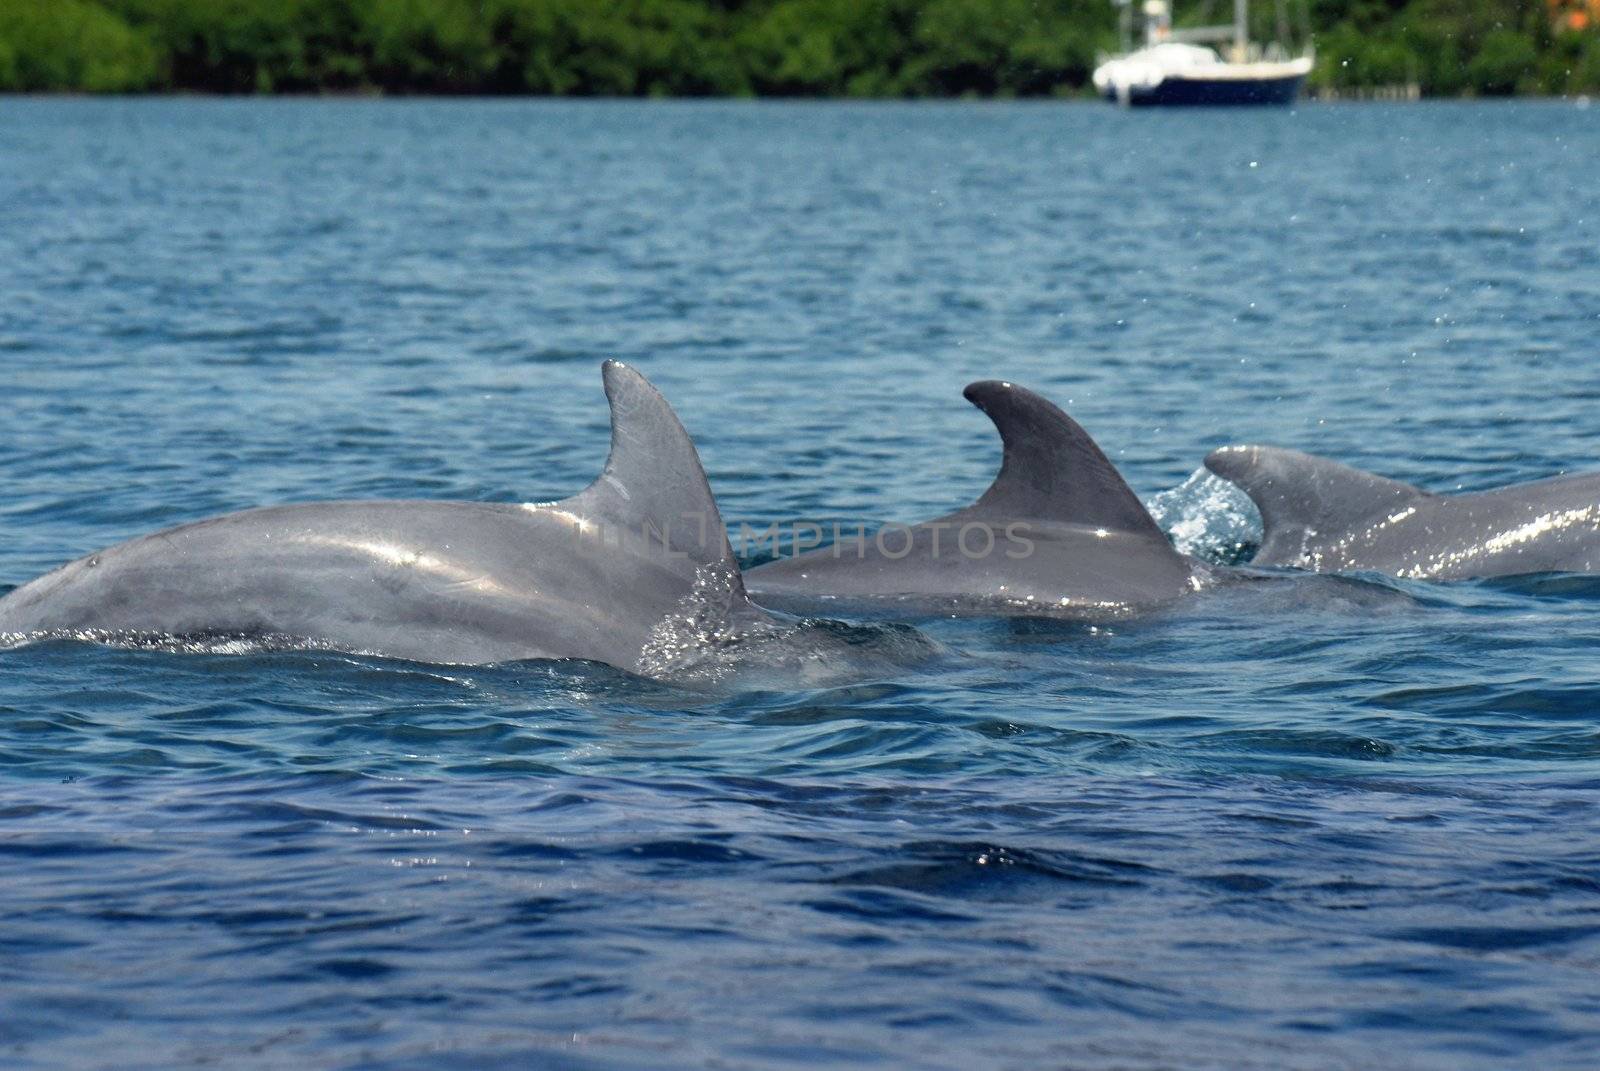 FAMILY OF DOLPHINS by cienpies